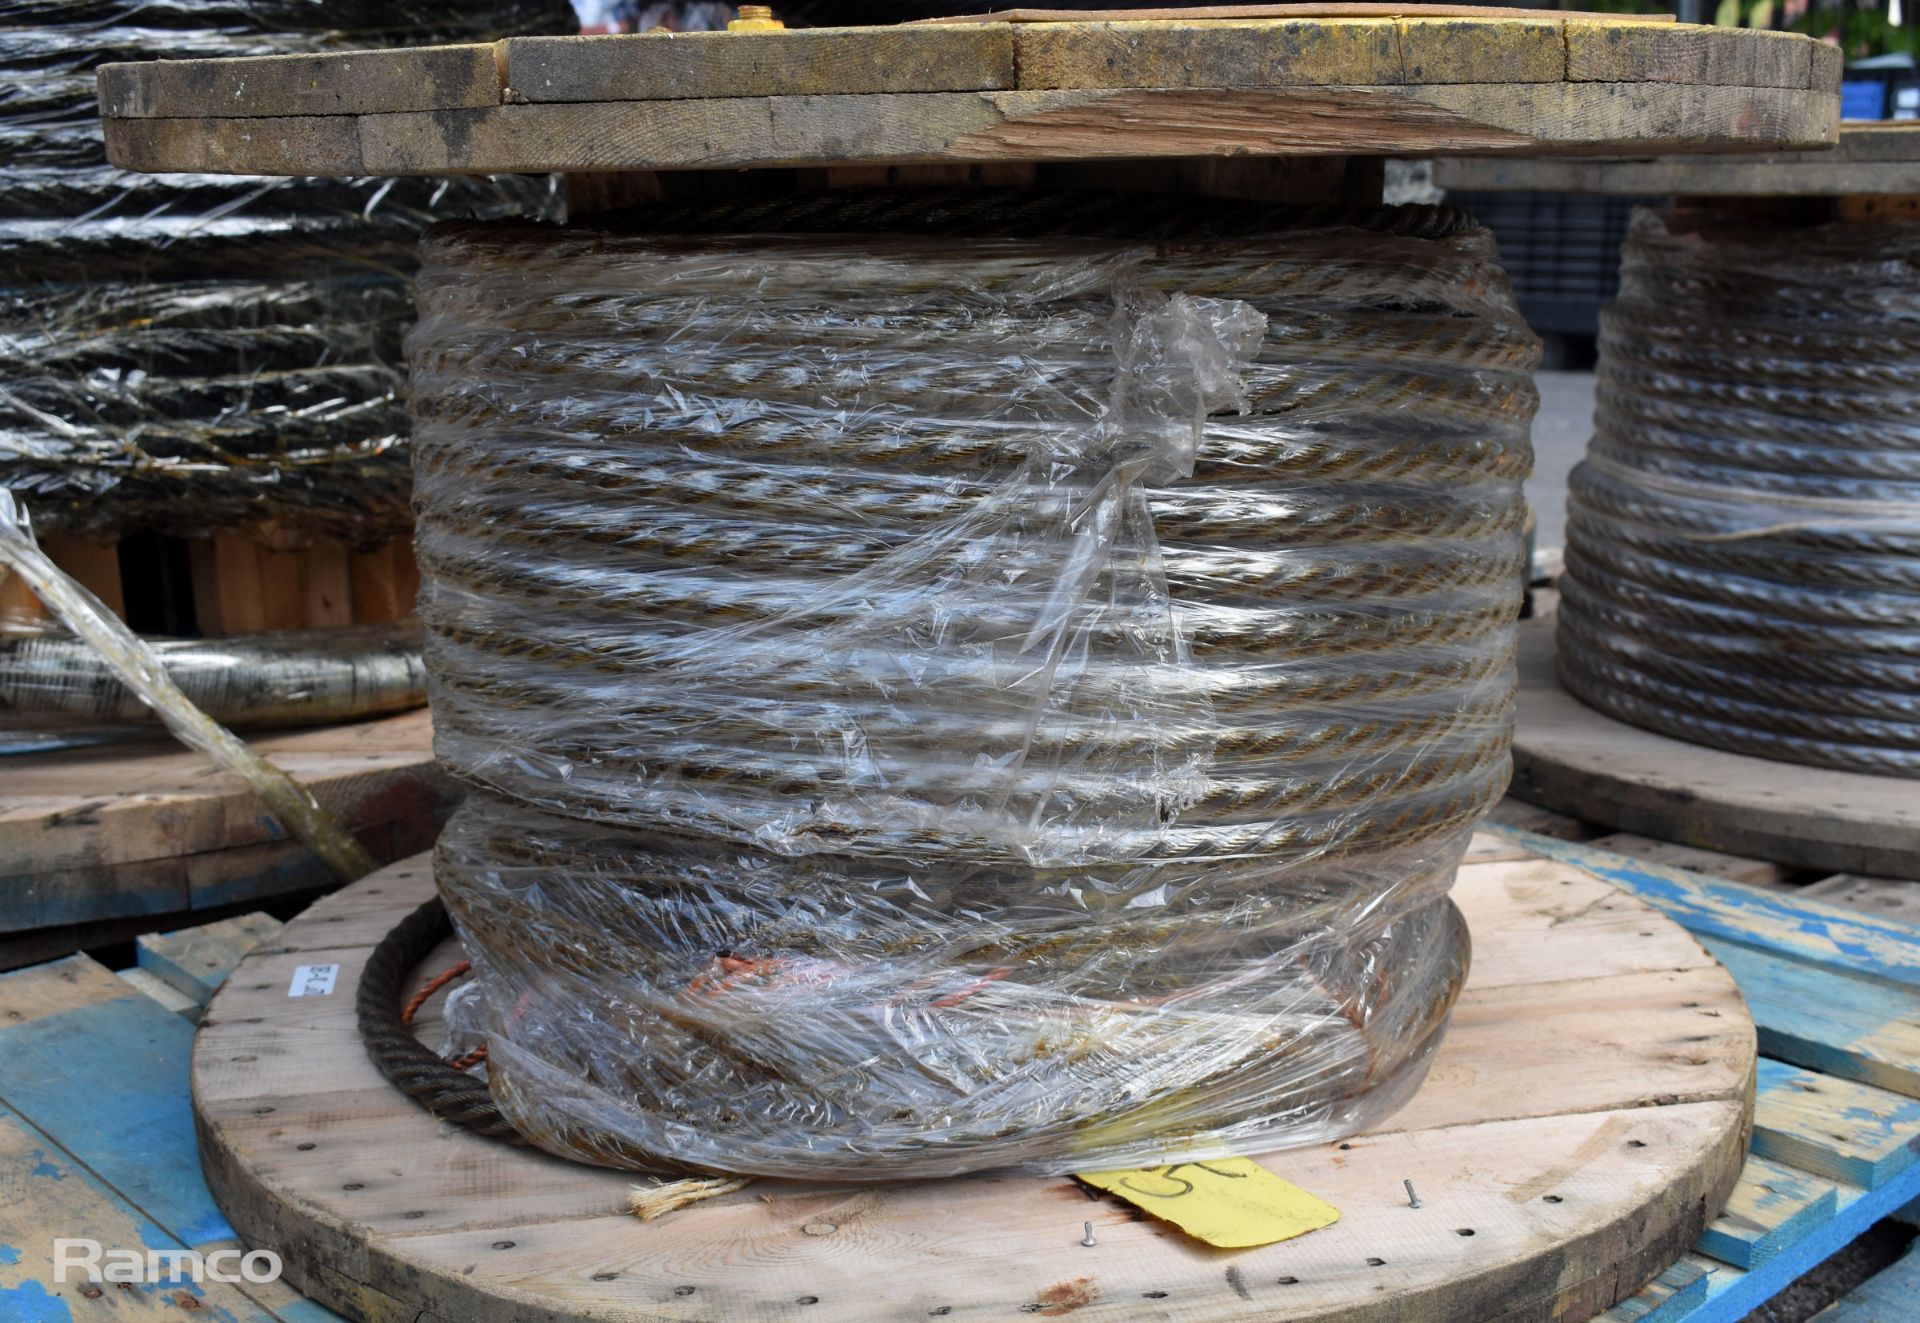 24mm 6 strand galvanised steel wire rope reel - approx weight: 300kg - Image 3 of 4